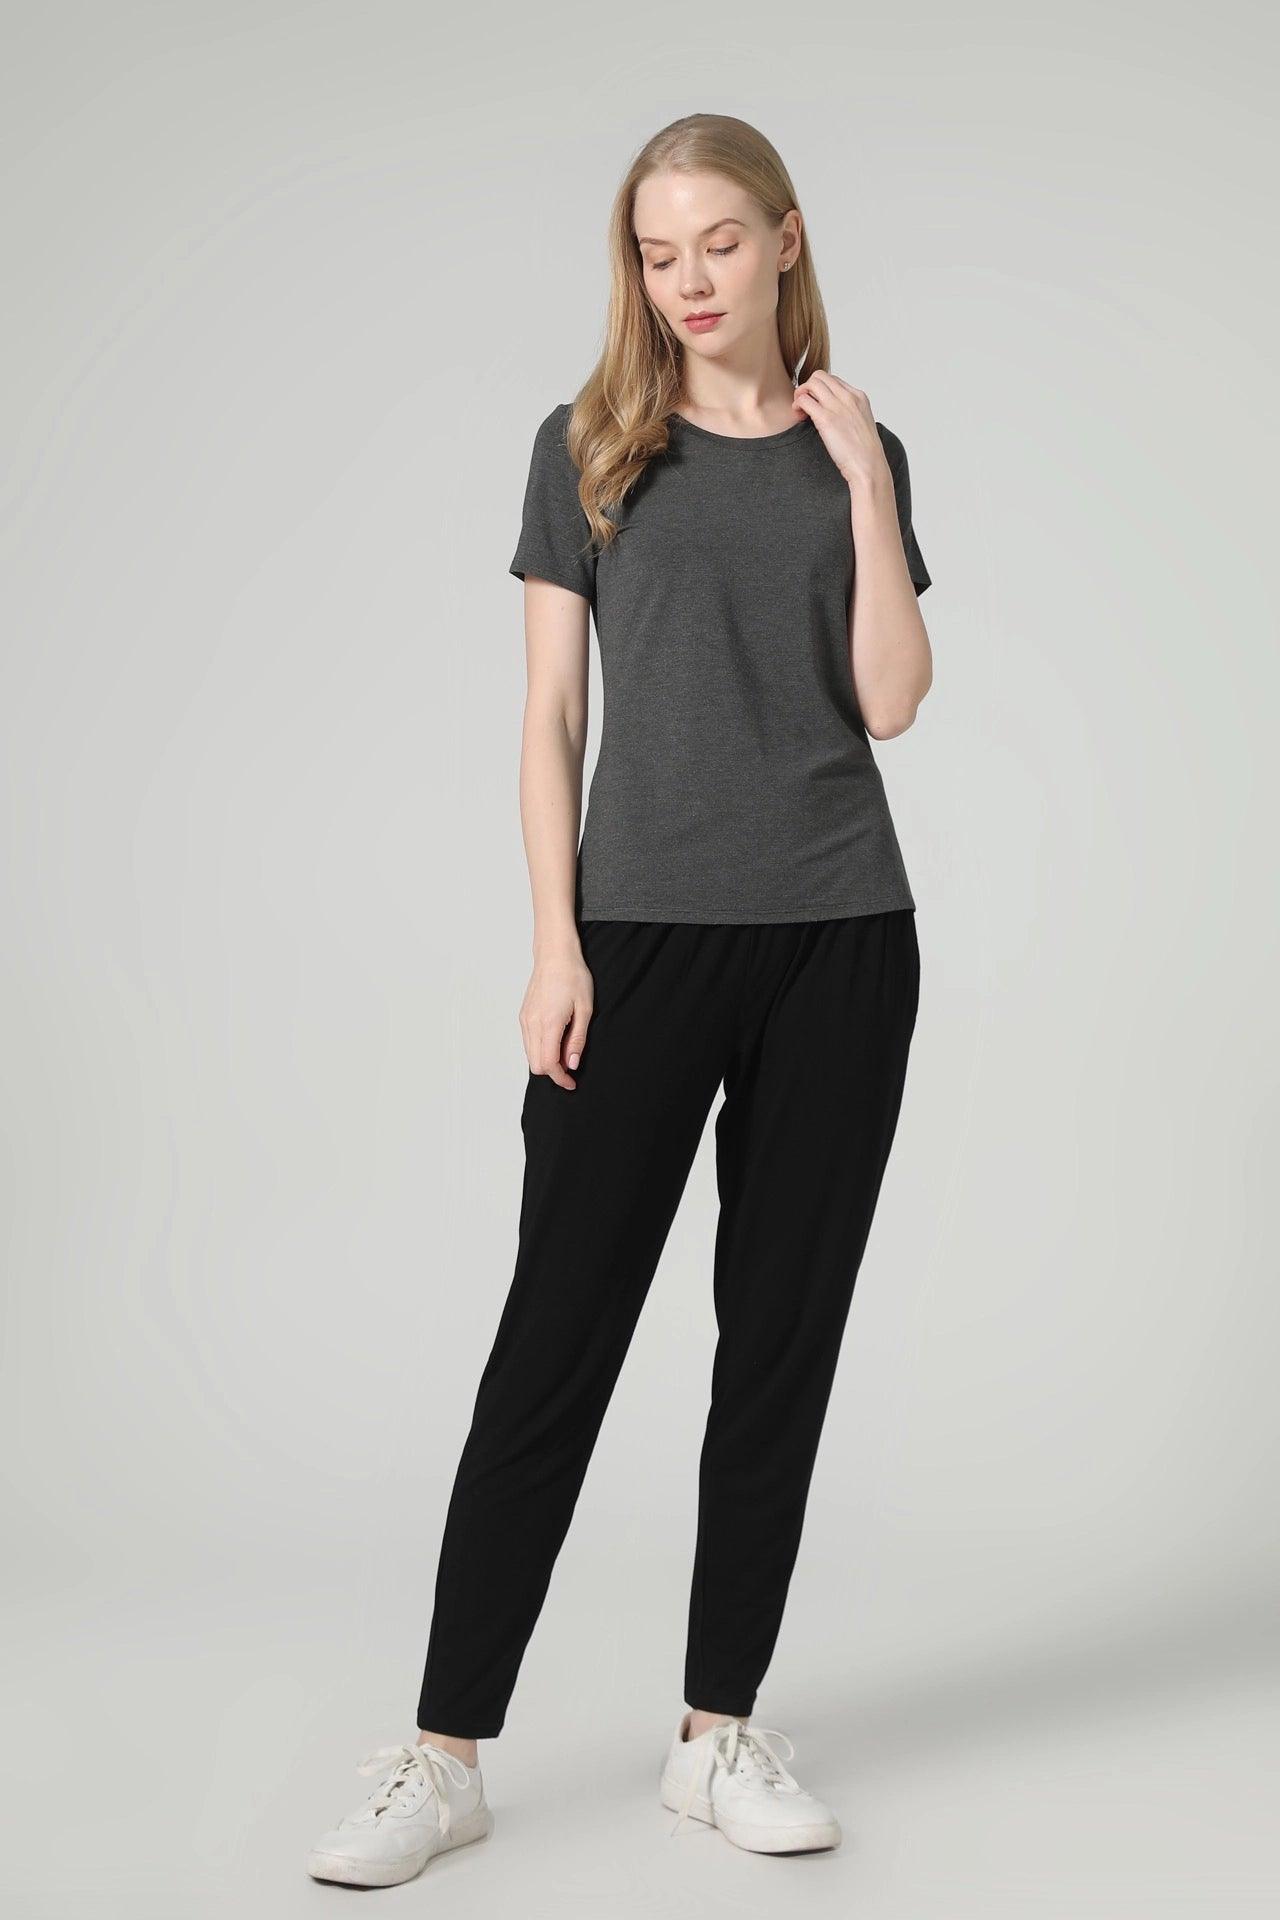 Women&#39;s Super-Soft High Rise Joggers - NOT LABELED